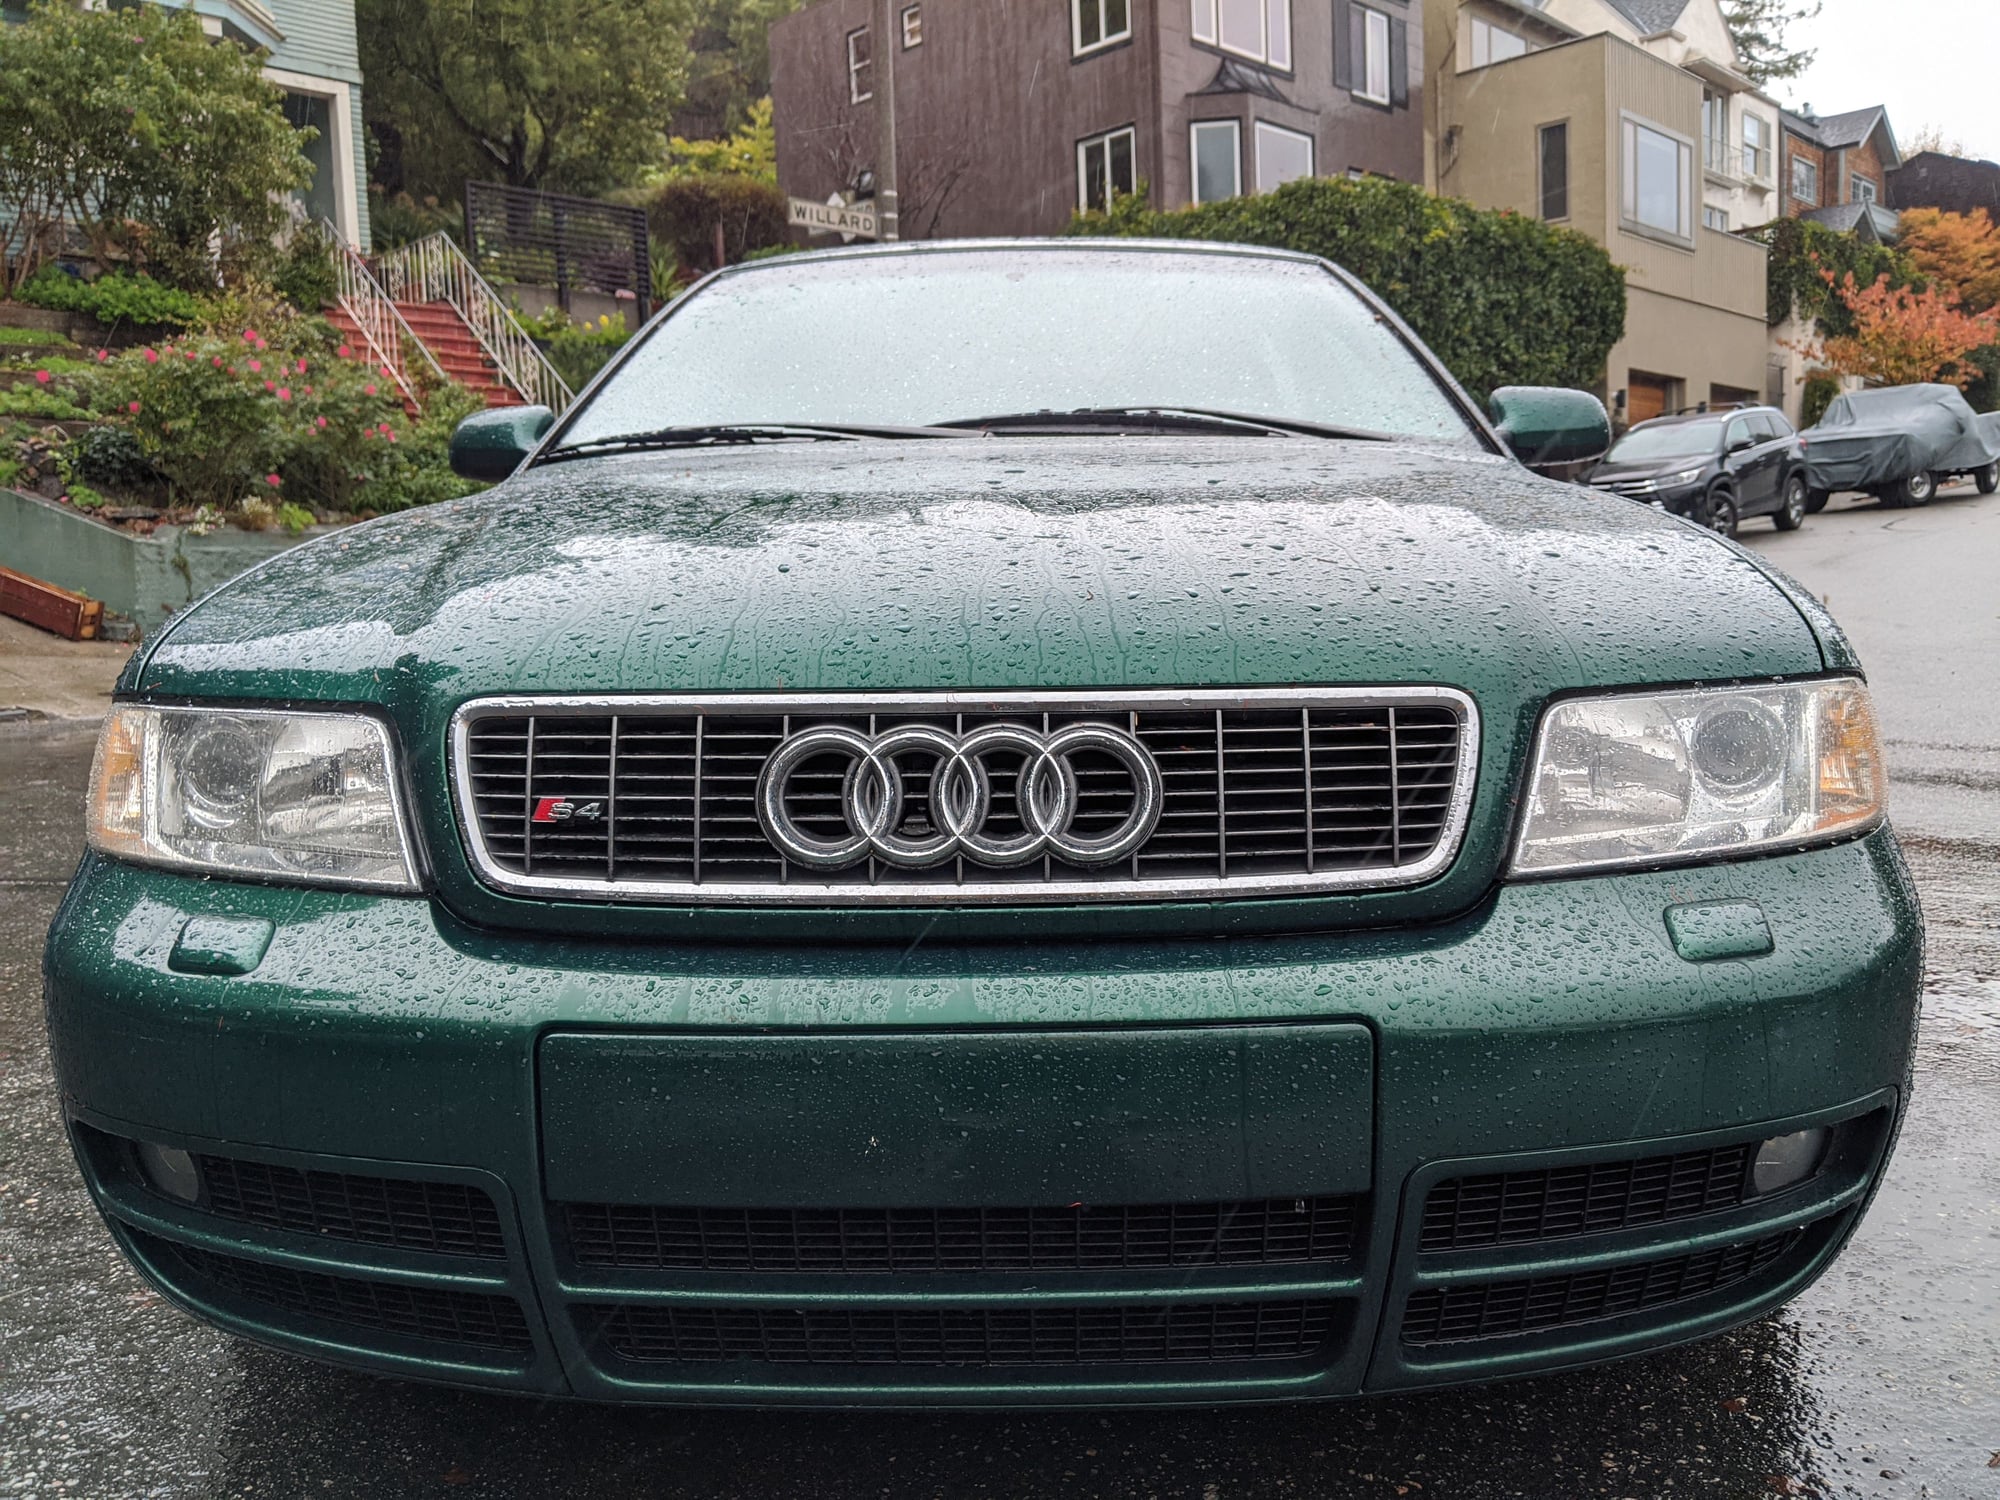 Find of the Day: 2001.5 Cactus Green Audi S4 - Audi Club North America